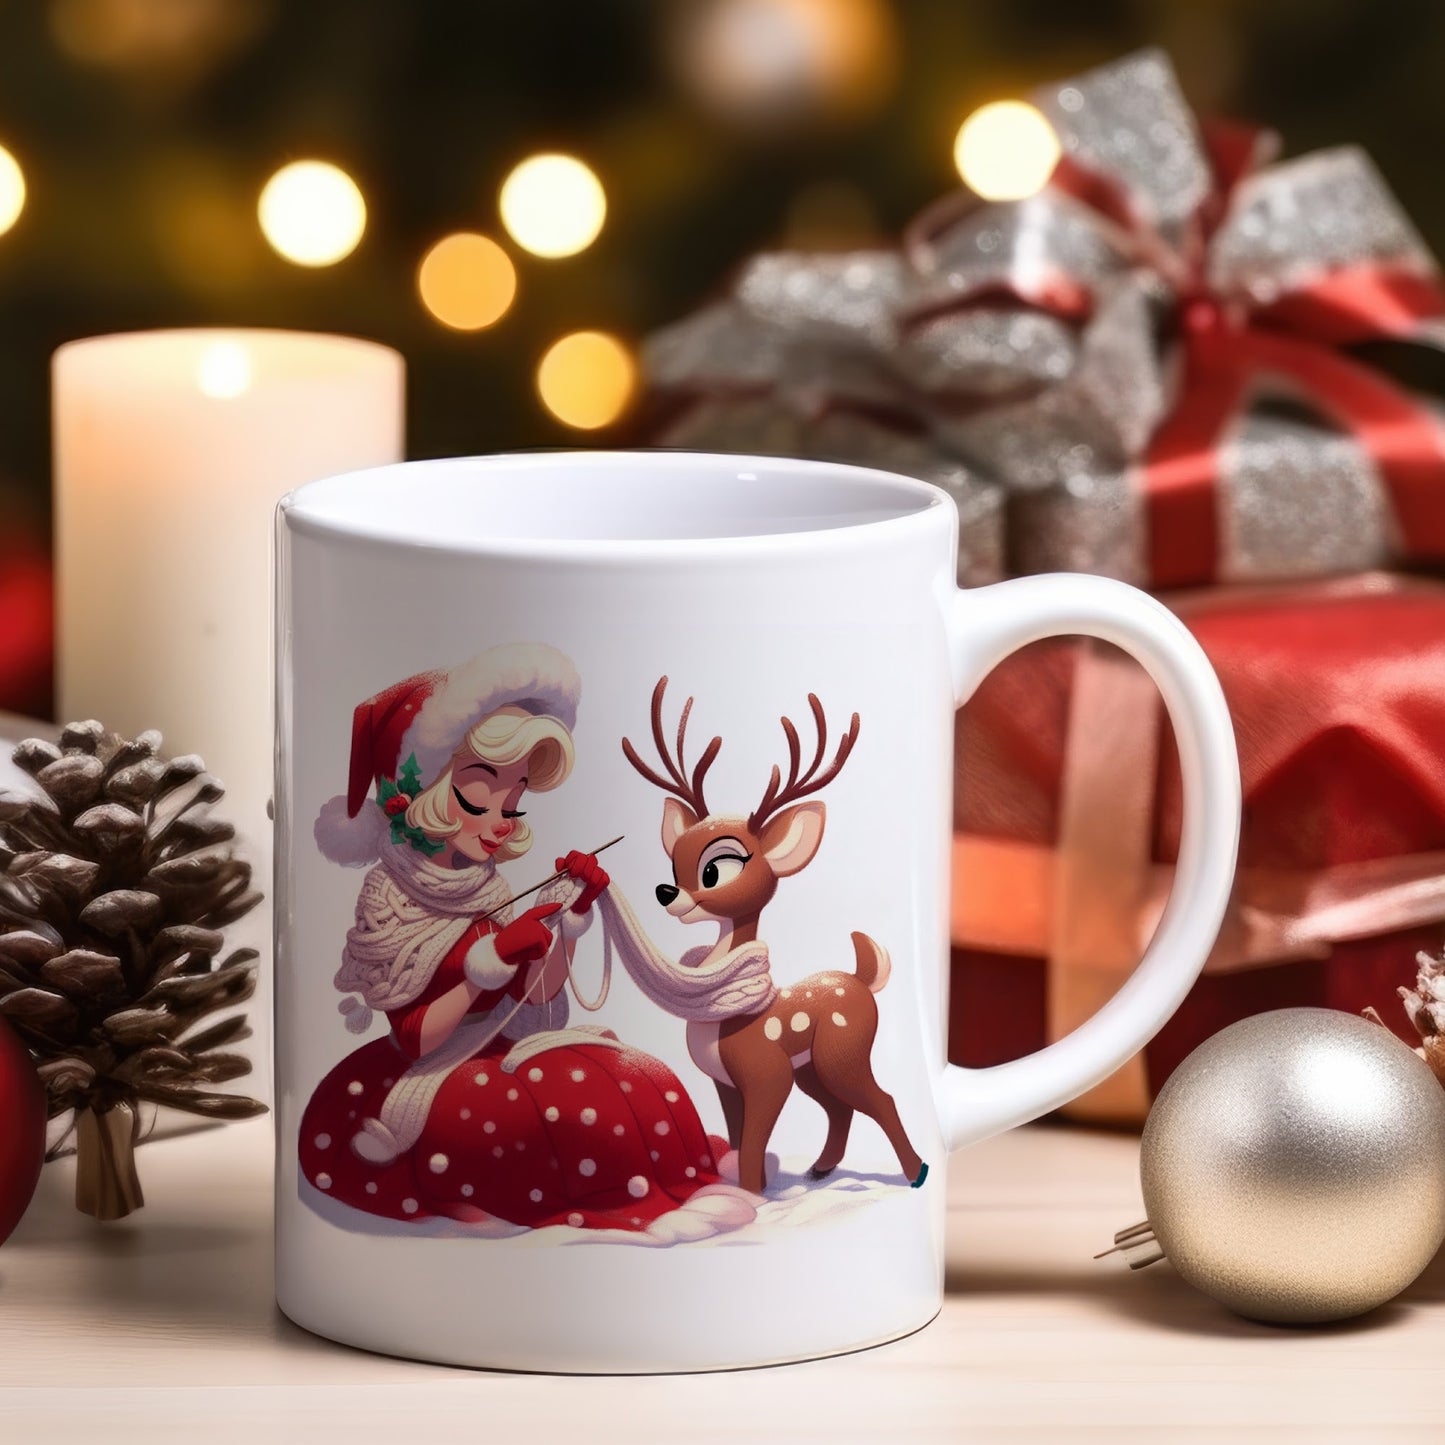 Claus and Reindeer Mug, Unique Christmas Gifts, White Elephant Gifts, Christmas Mug, Mug Christmas Designs, Secret Santa Gift Gift